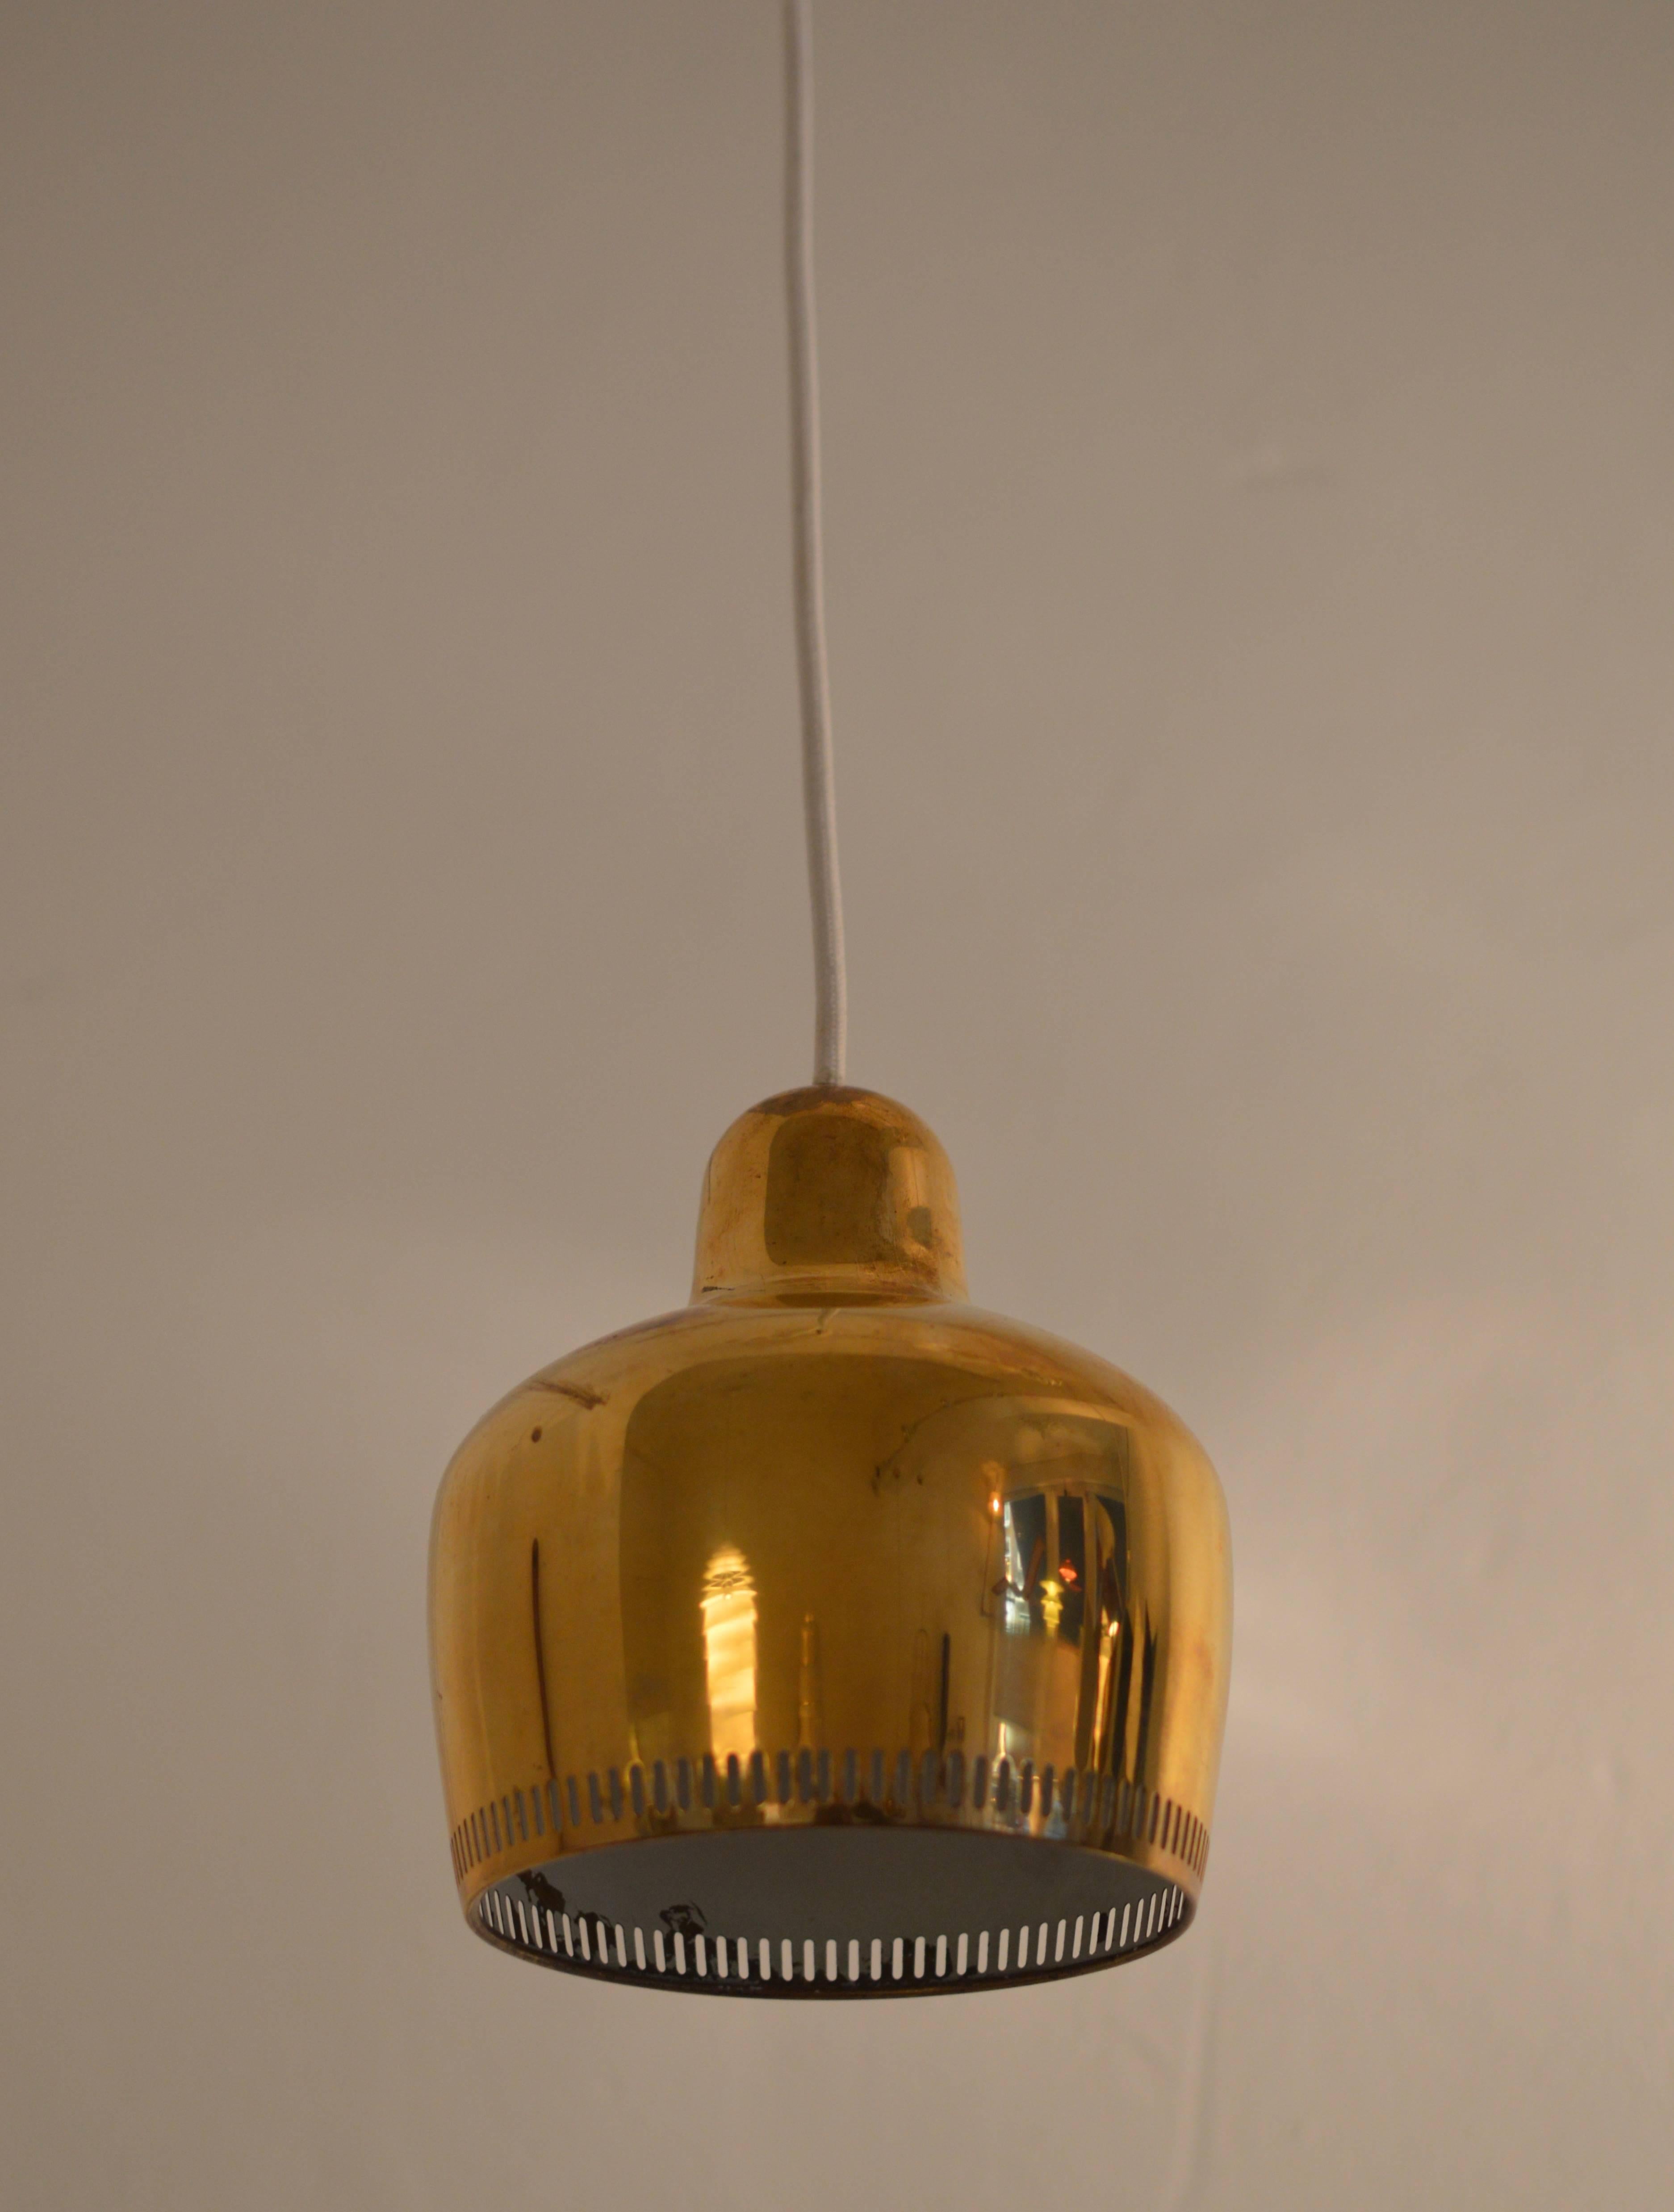 In 1936 Aino and Alvar Aalto were commissioned to design the interior of the Savoy Restaurant in Helsinki for which they designed this 'Golden Bell' pendant made out of one brass sheet of steel. The die cut stripe pattern perforated rim provides a